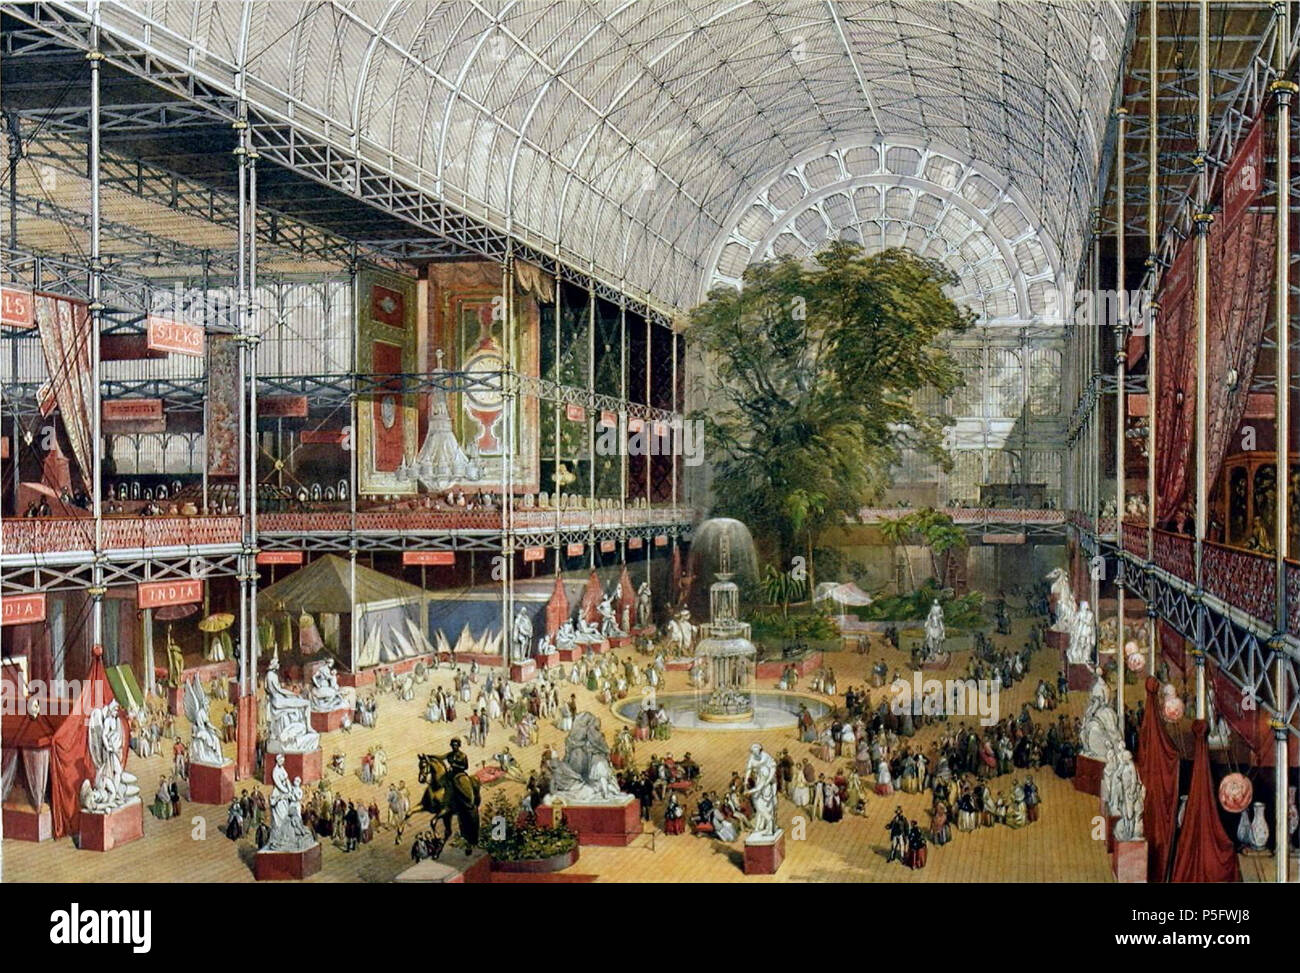 N/A. English: McNeven, J., The transept from the Grand Entrance, Souvenir of the Great Exhibition , William Simpson (lithographer), Ackermann & Co. (publisher), 1851, V&A . 1851. J. McNeven 393 Crystal Palace interior Stock Photo